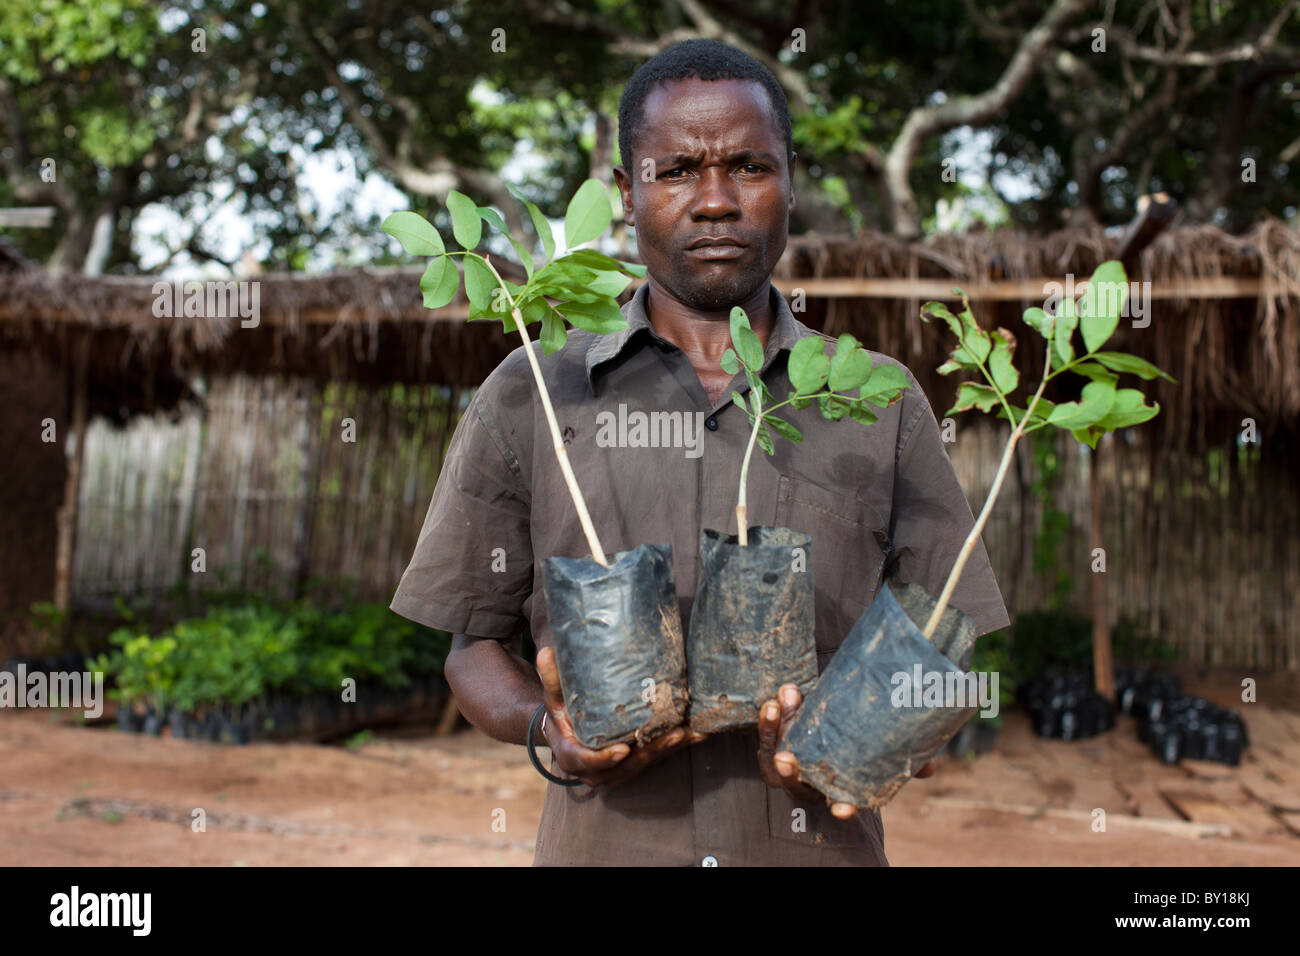 NAMULA, MOZAMBIQUE, May 2010 : Victor Ramos, 35, who runs a tree nursery for a simple licensee holds Shamfuta tree seedlings. Stock Photo